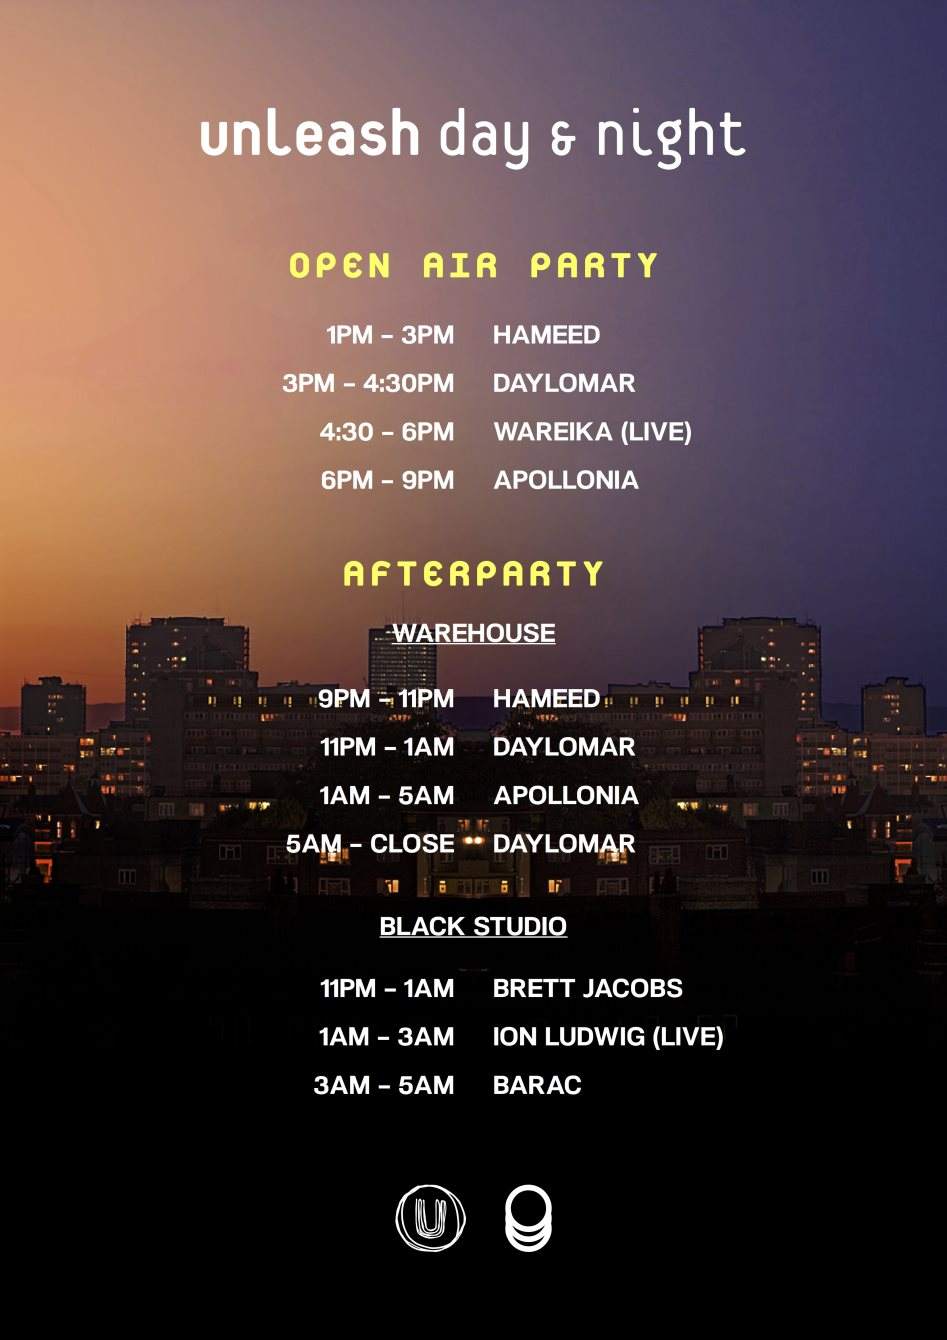 Unleash Open Air & Afterparty with Apollonia, Wareika, Ion Ludwig, Barac - フライヤー裏